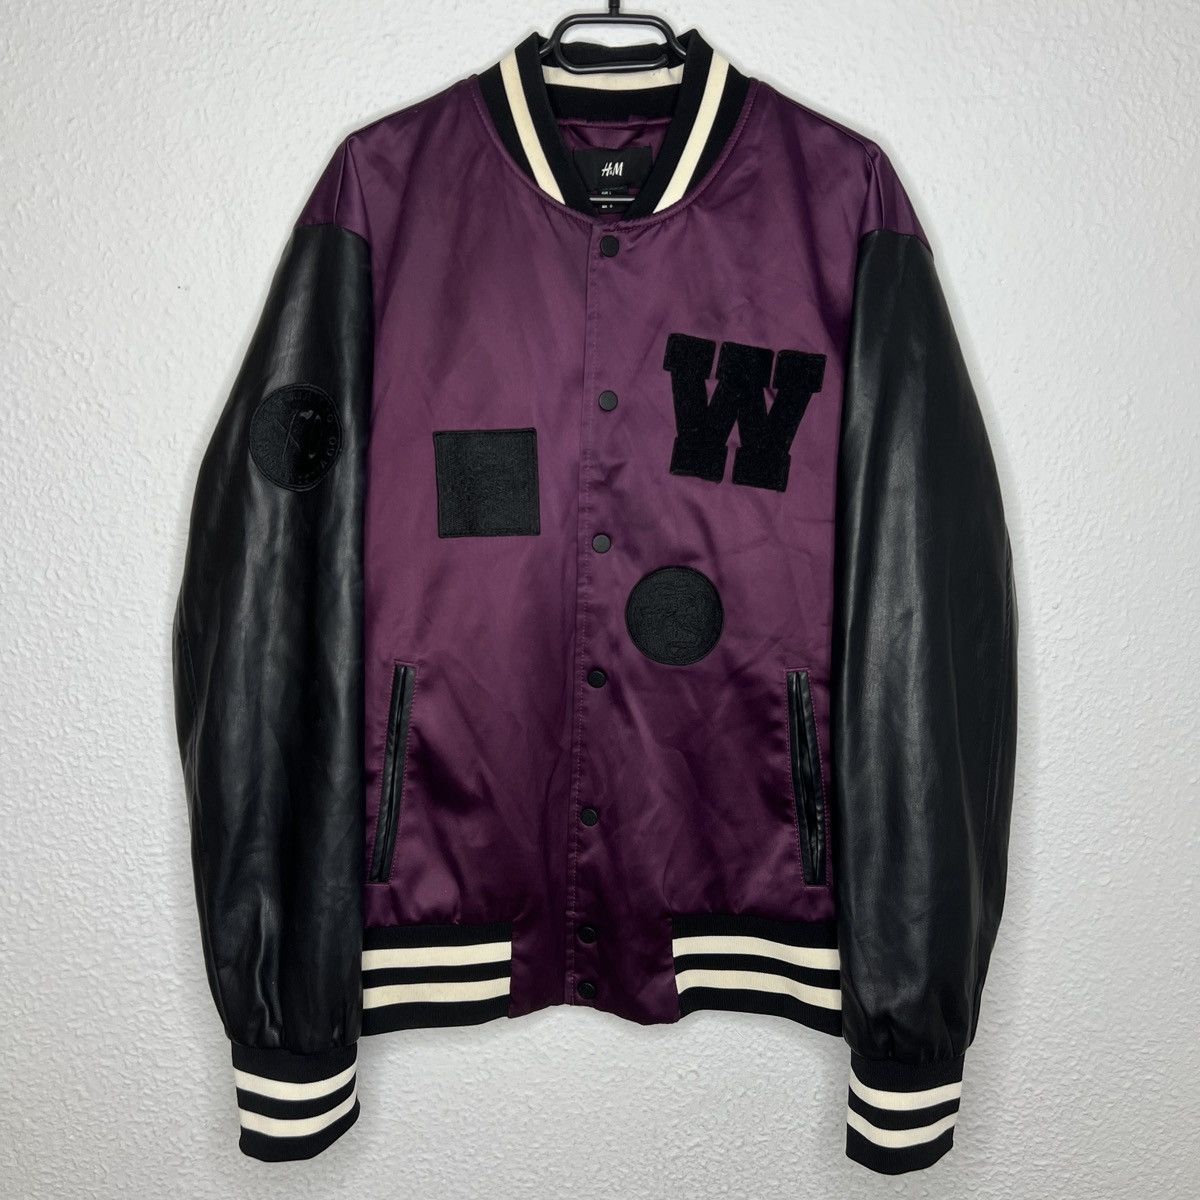 H&M The Weeknd XO H&M Varsity Jacket Purple Black Leather Drill | Grailed